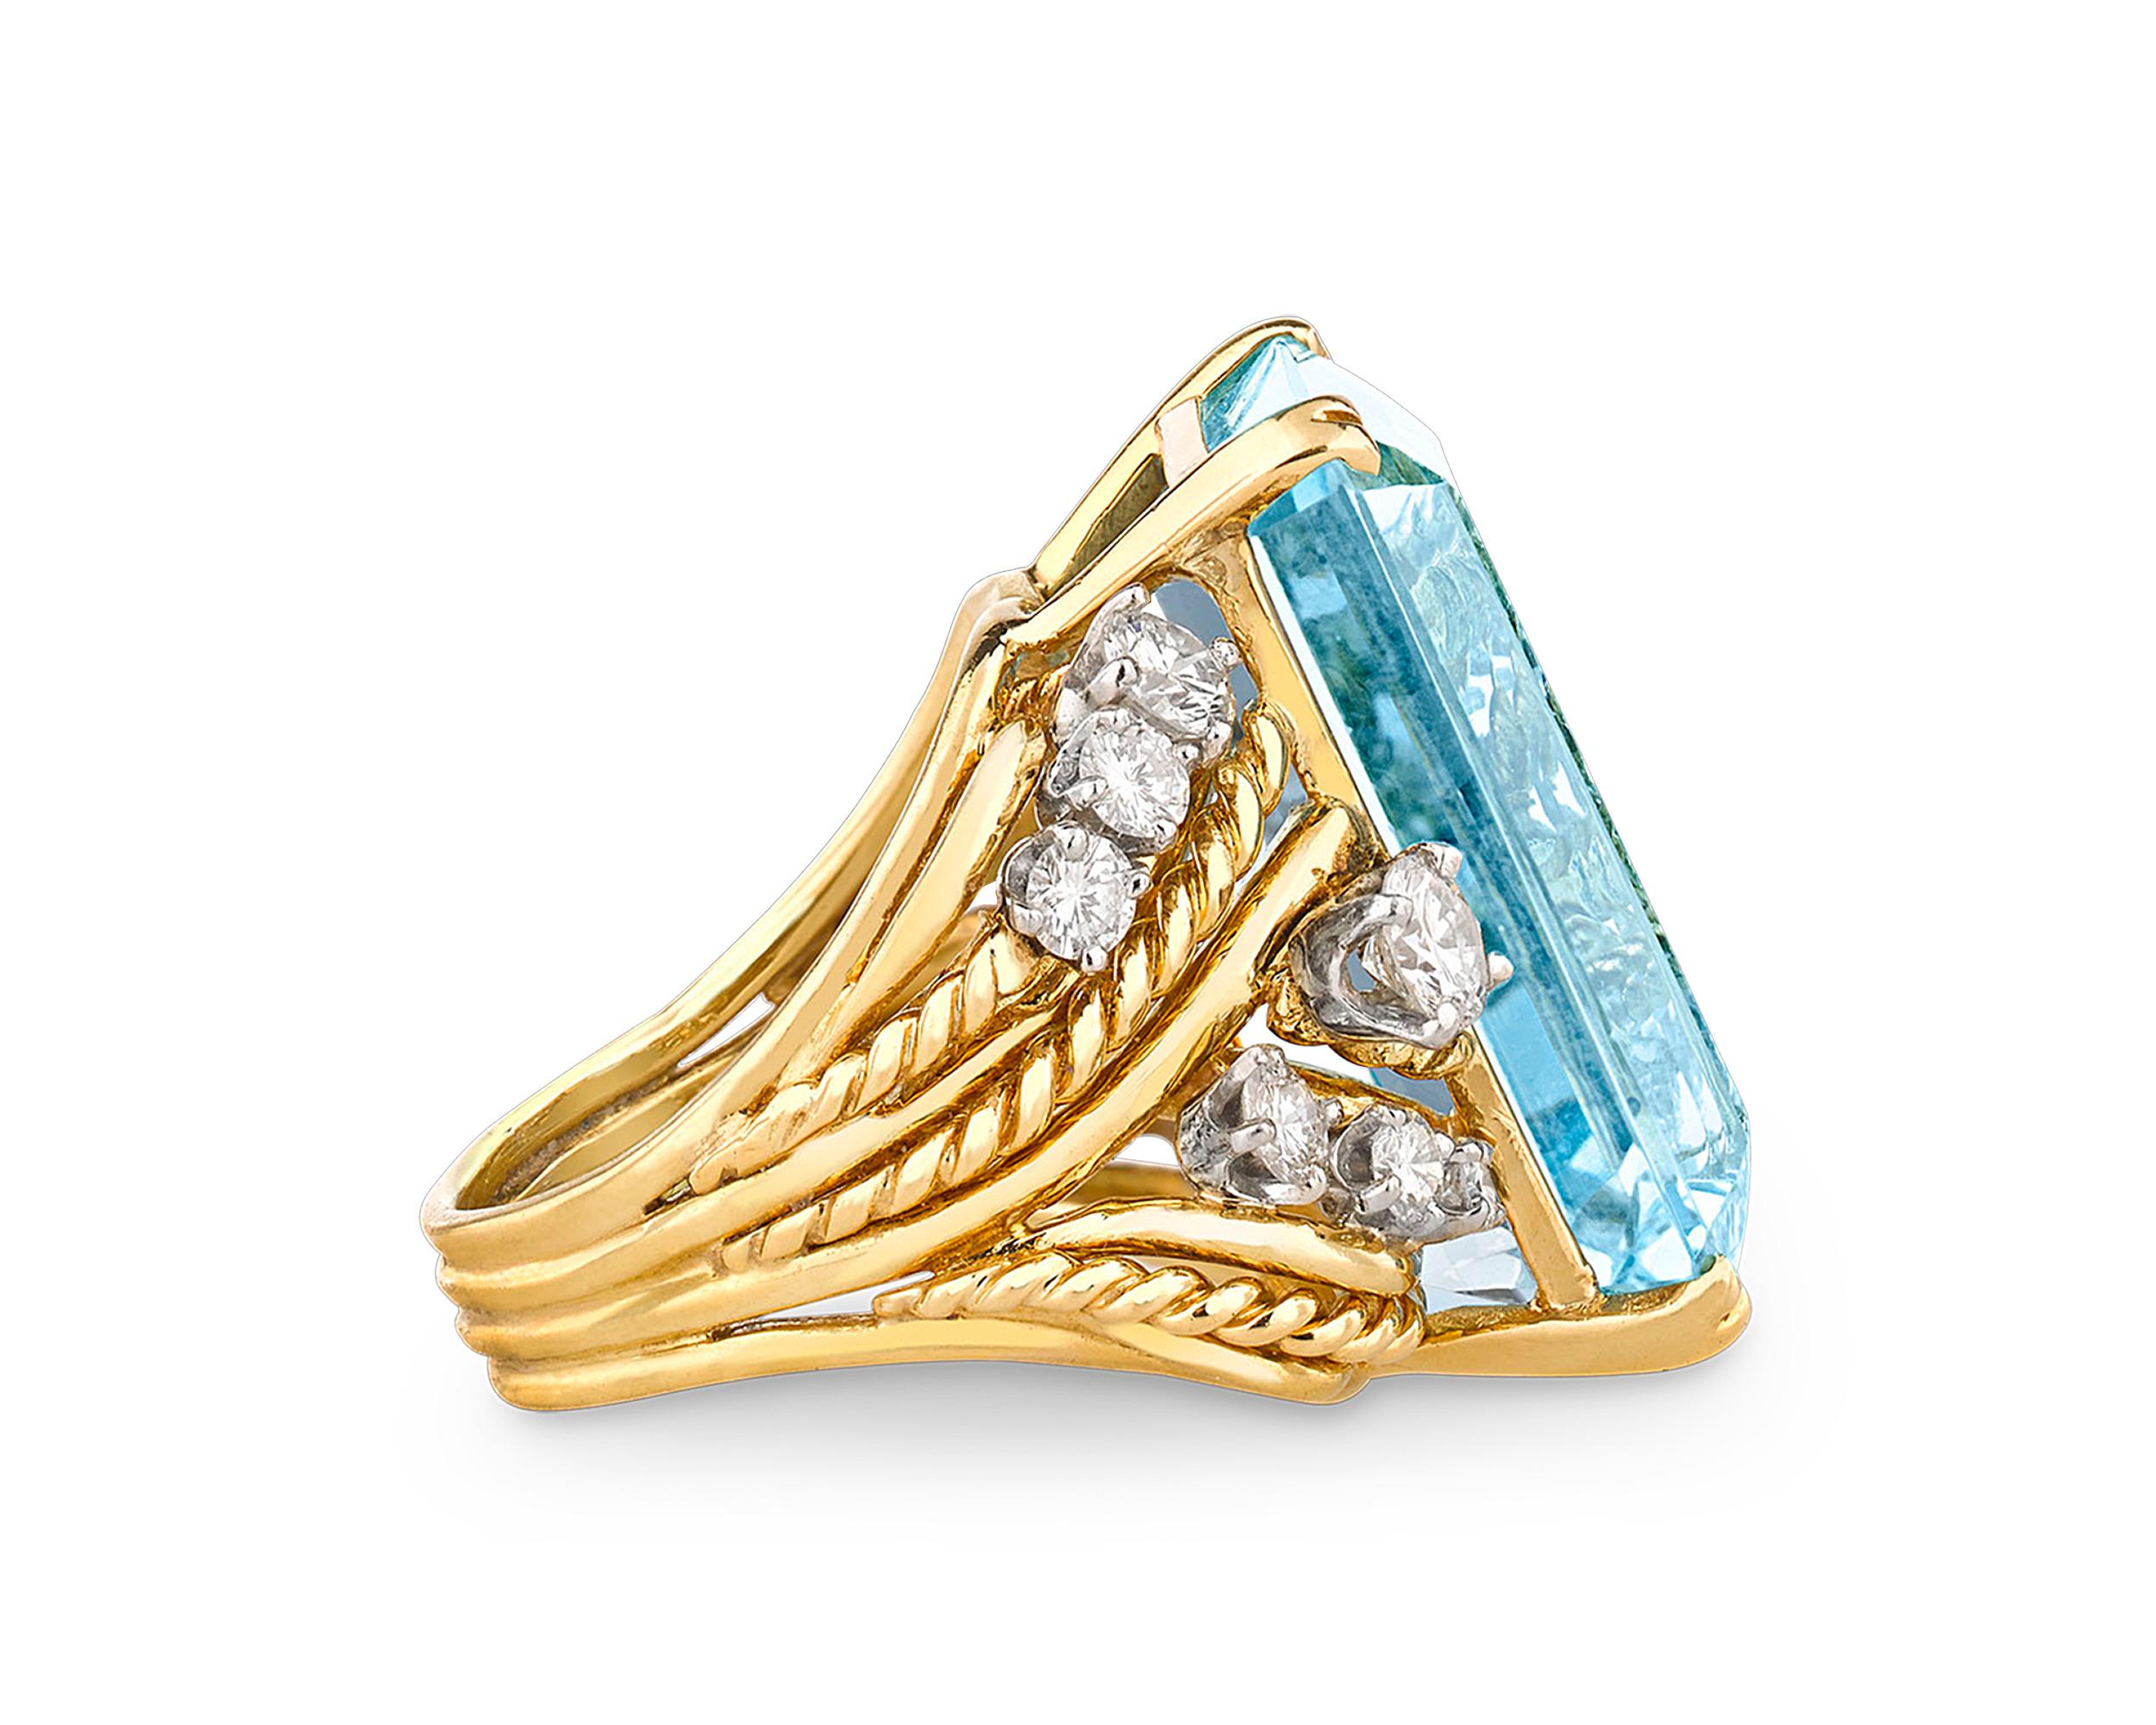 A stunning, pastel blue emerald-cut aquamarine weighing a dazzling 23.30 carats glistens in this eye-catching ring. Displaying a magnificent Mediterranean-blue hue, the stone is stylishly presented in an 18k yellow gold setting with sparkling white